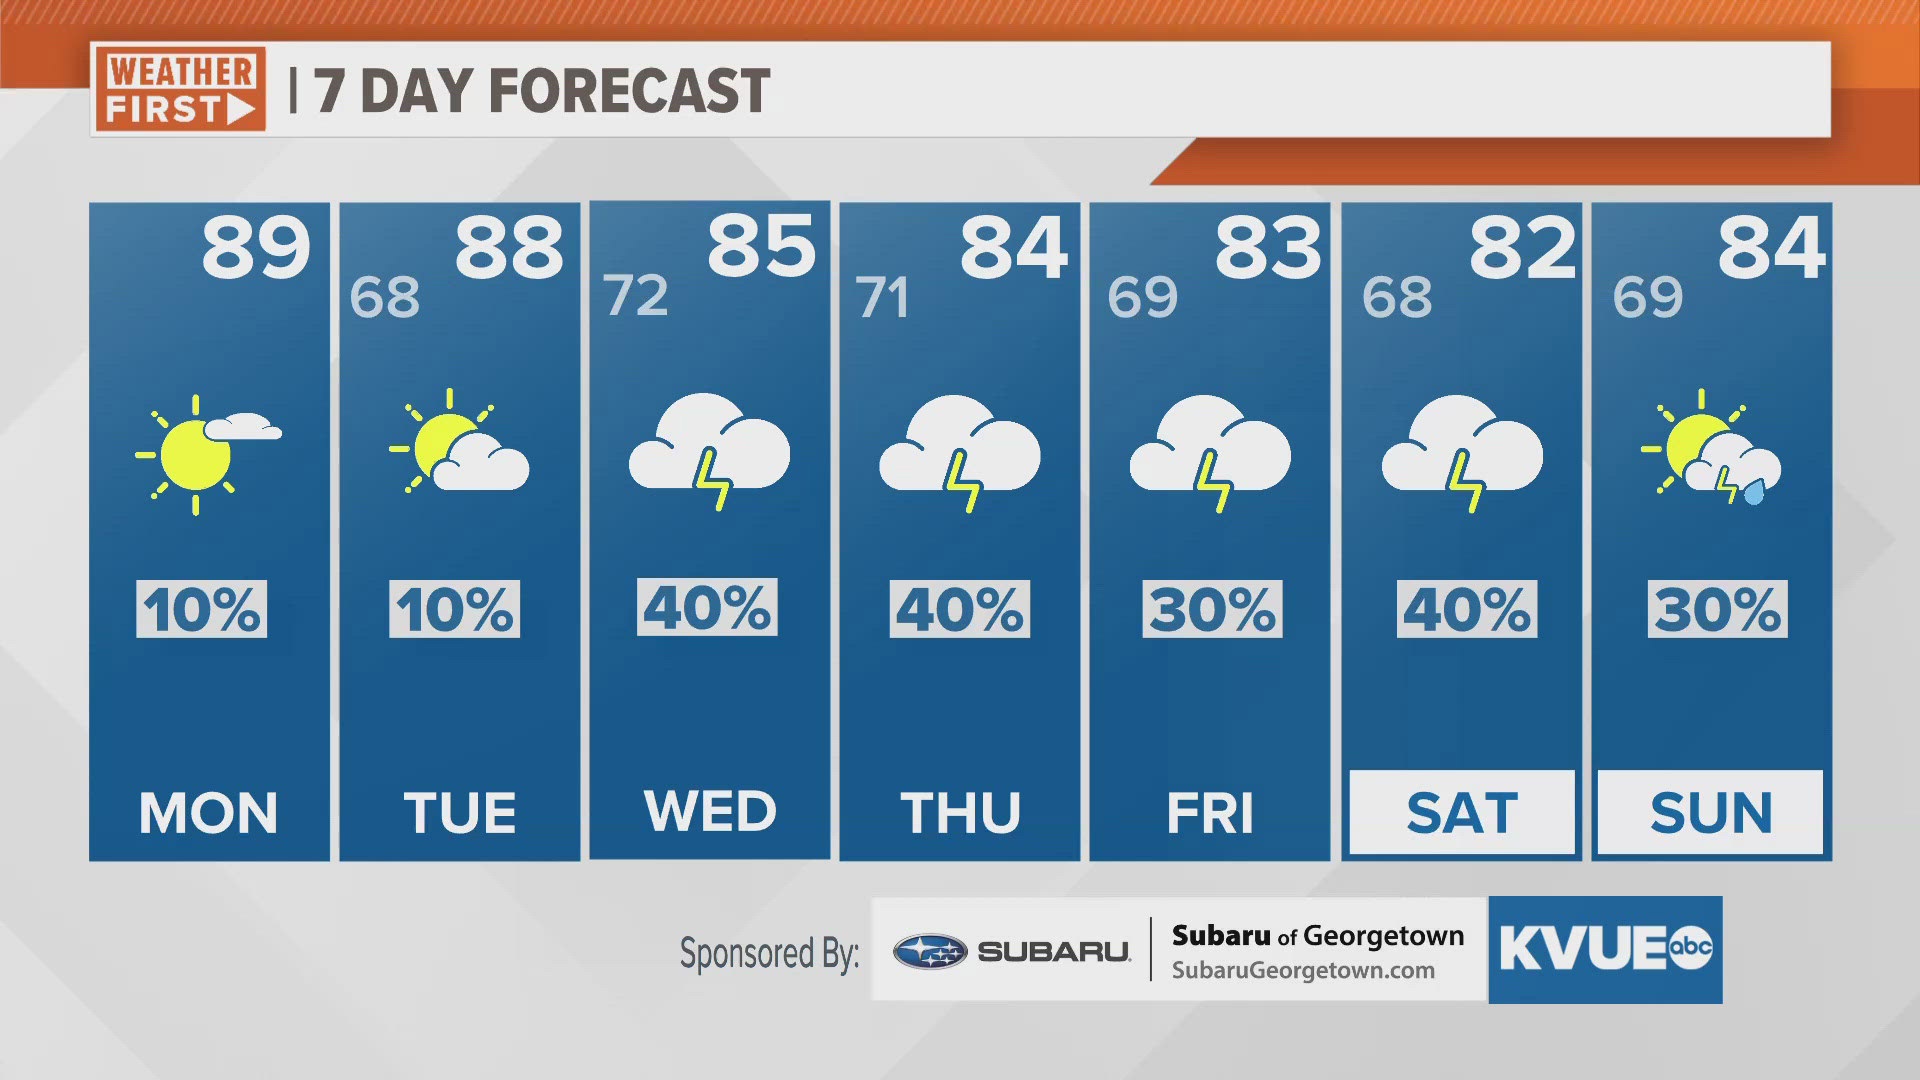 Warm and hazy start to the workweek; rain chances on the rise